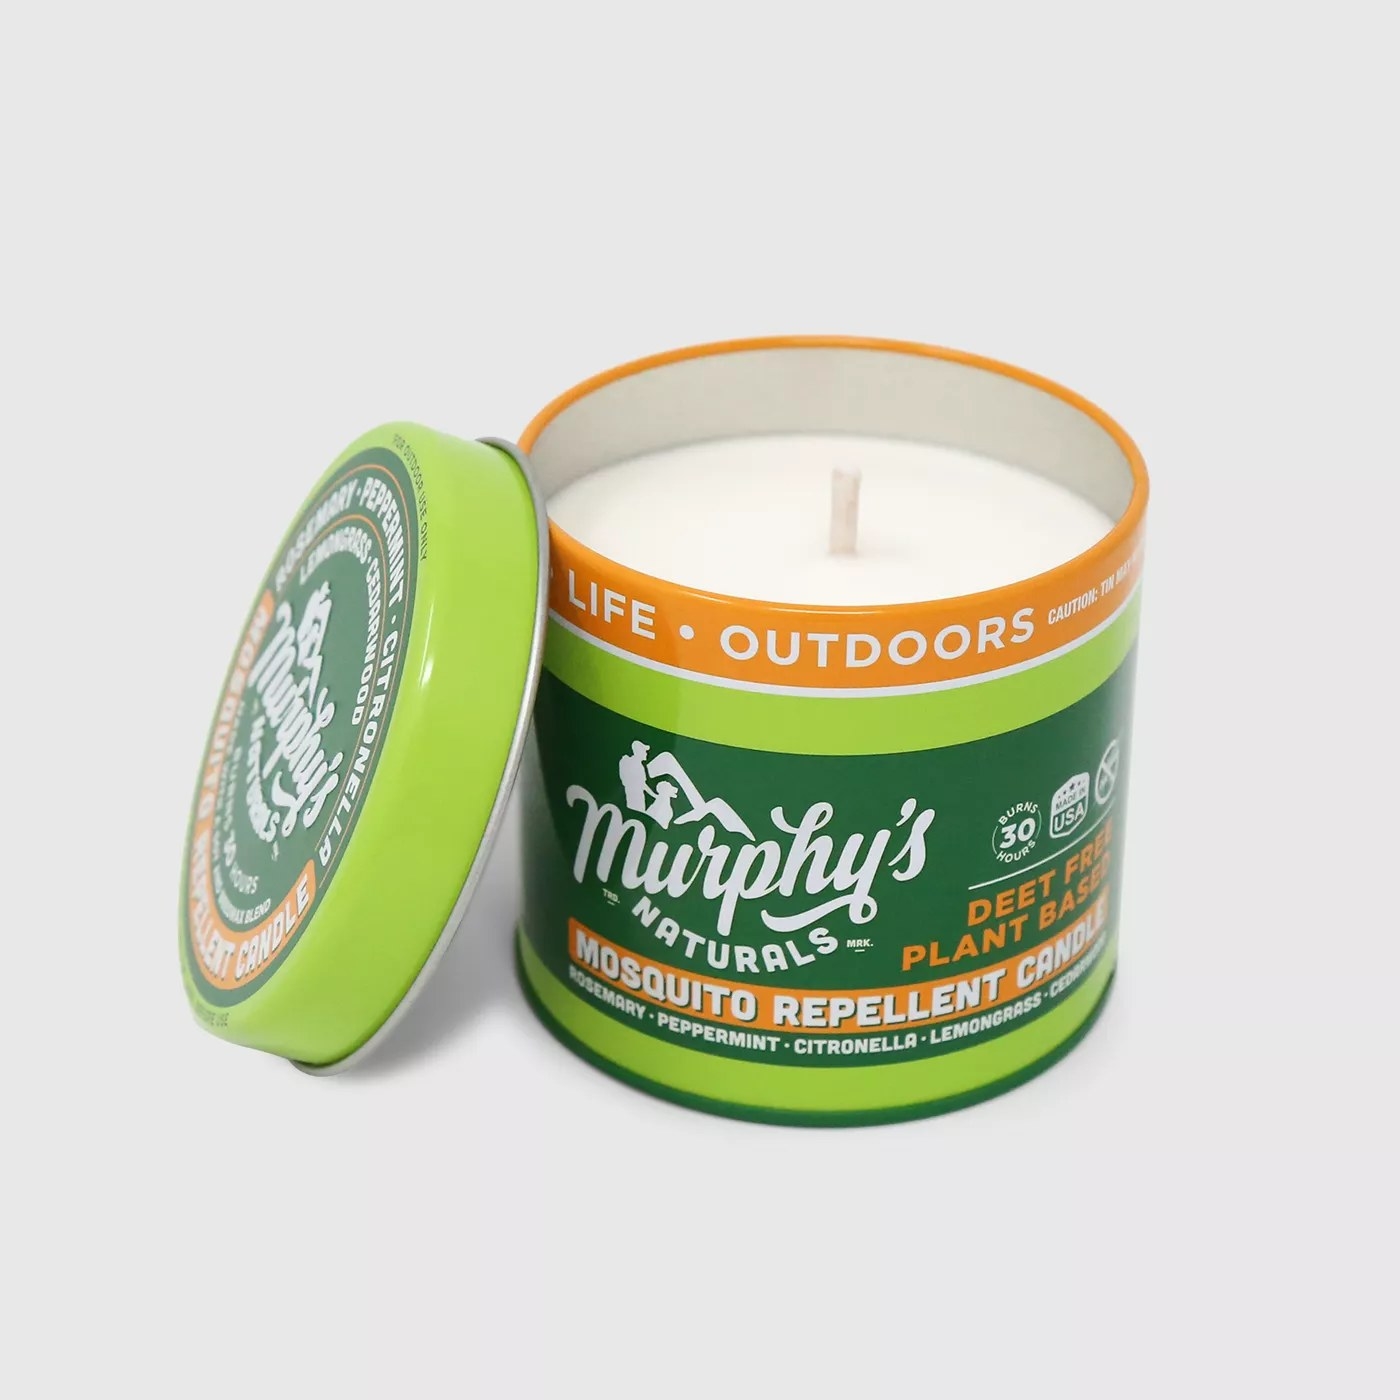 The candle itself is white and has a mix of oranges and greens on the package and says &quot;Murphy&#x27;s Naturals&quot;